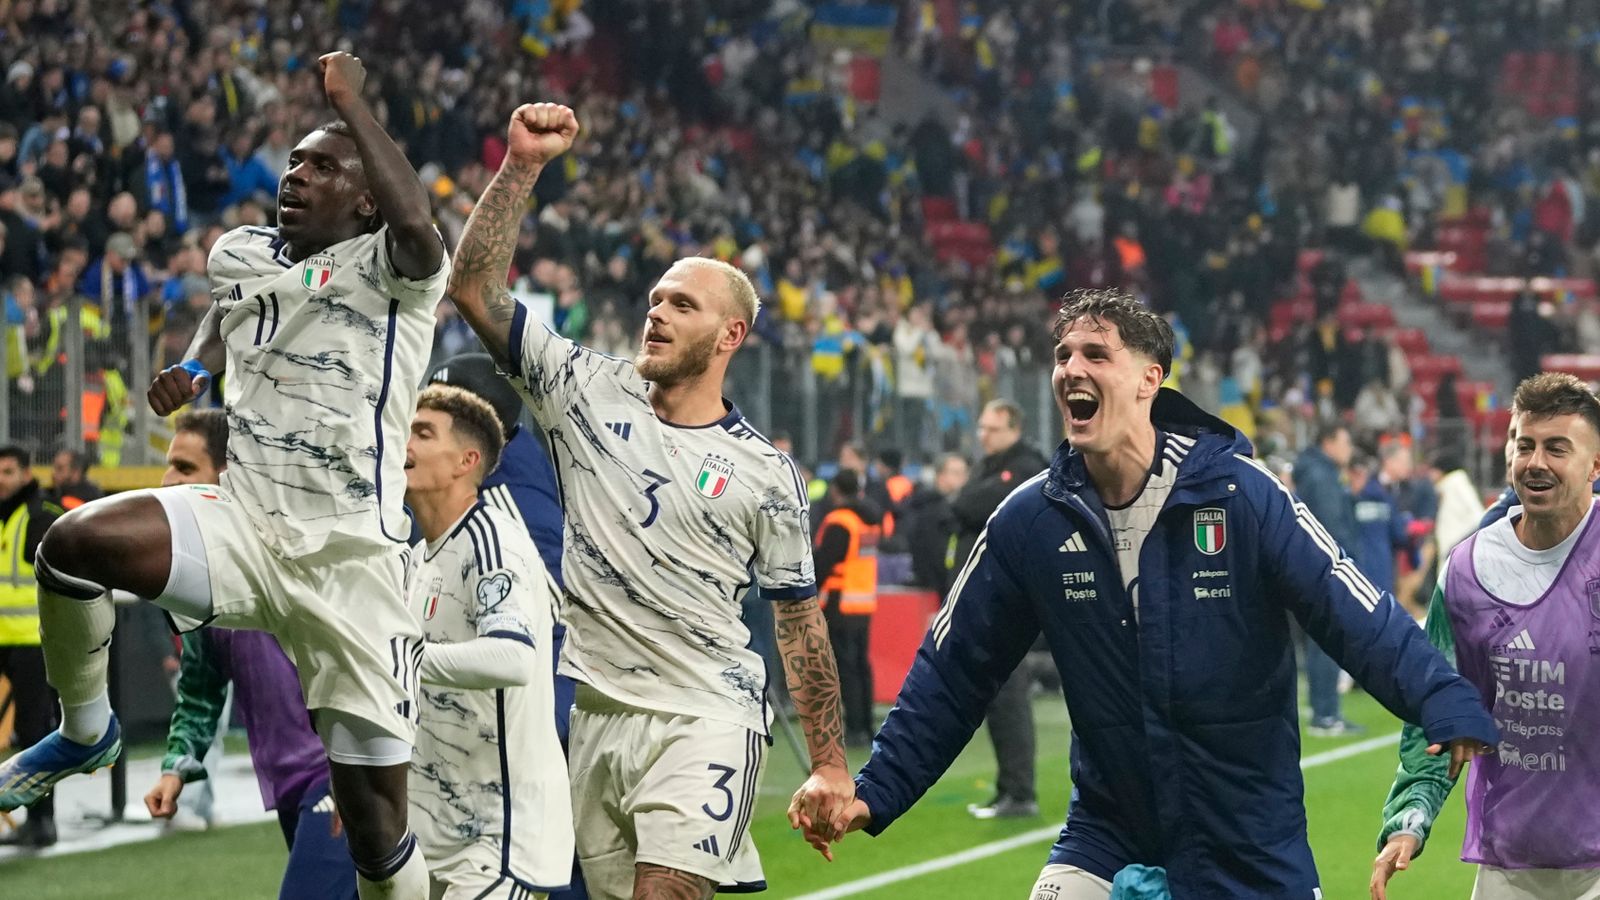 Italy players celebrate their qualifying after the Euro 2024 group C qualifying soccer match between Ukraine and Italy at the BayArena in Leverkusen, Germany, Monday, Nov. 20, 2023. (AP Photo/Martin Meissner)